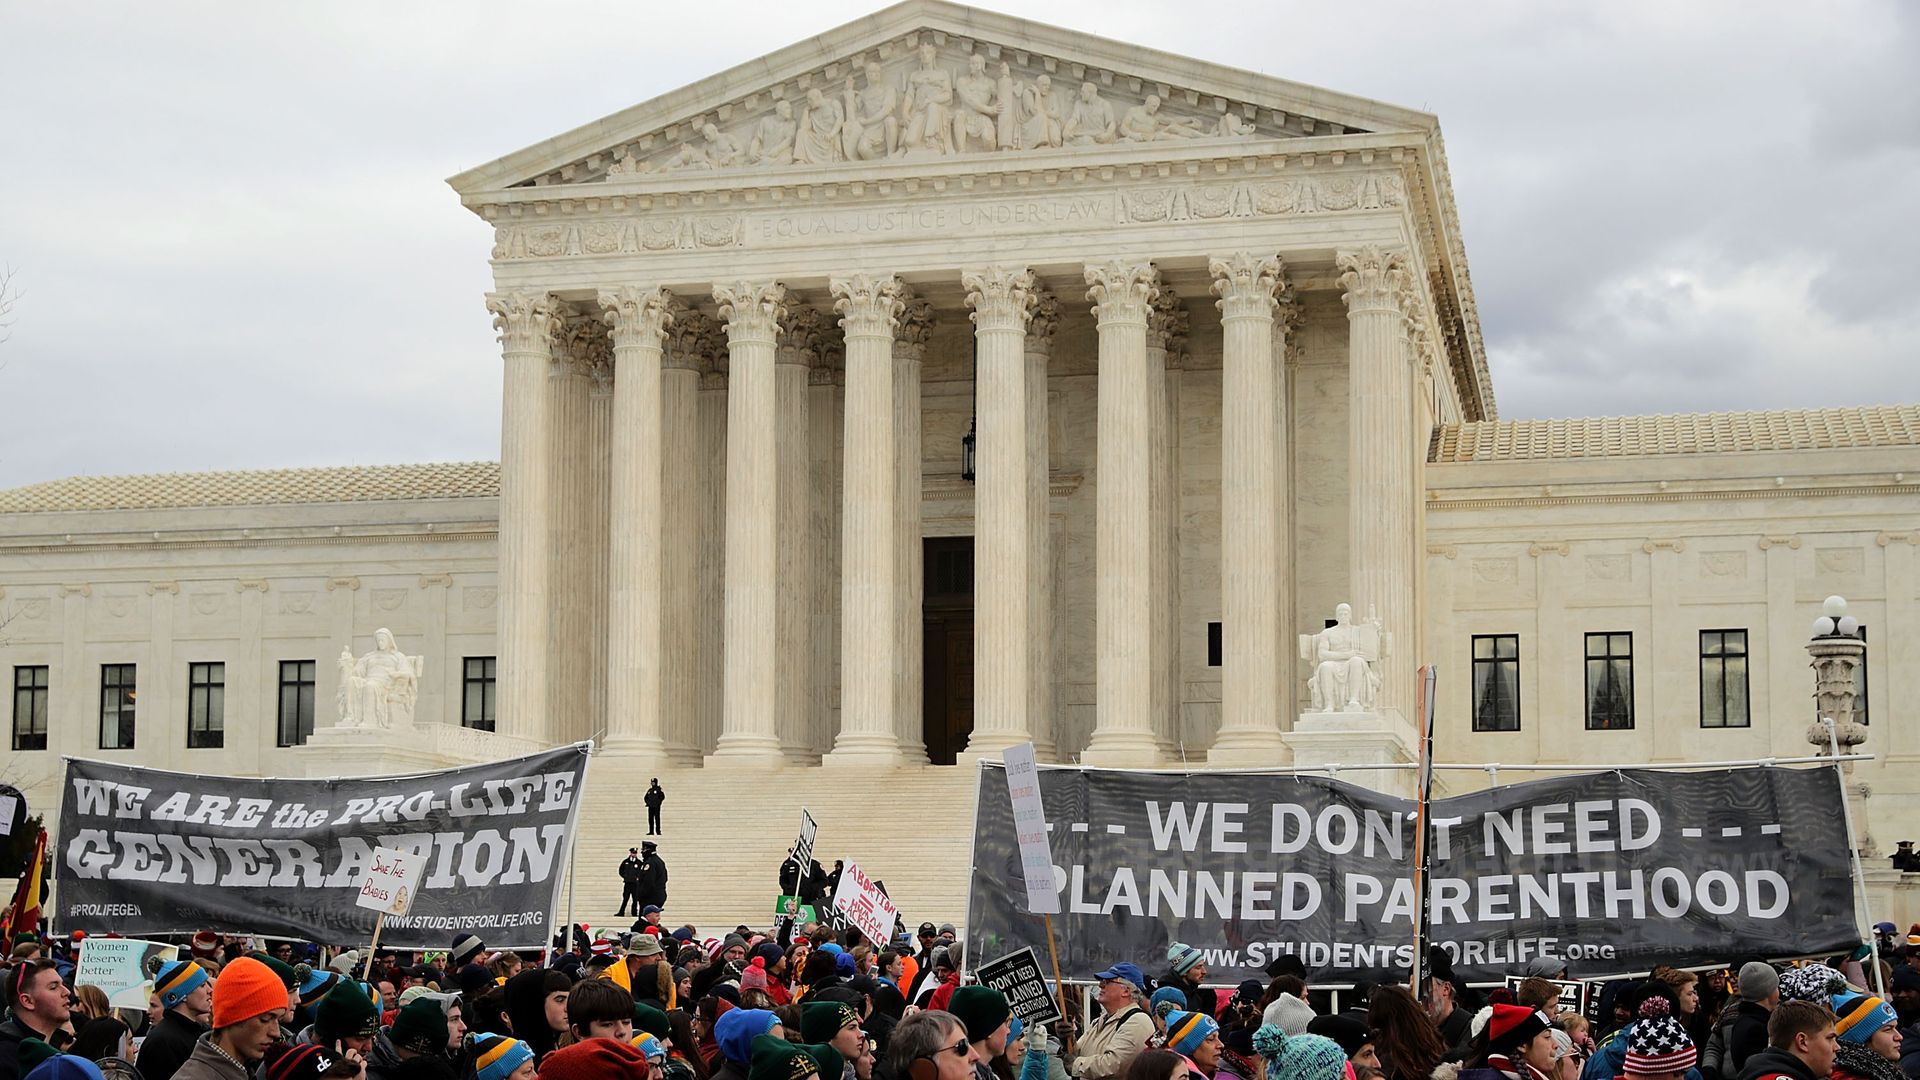 The annual March for Life, outside the Supreme Court building